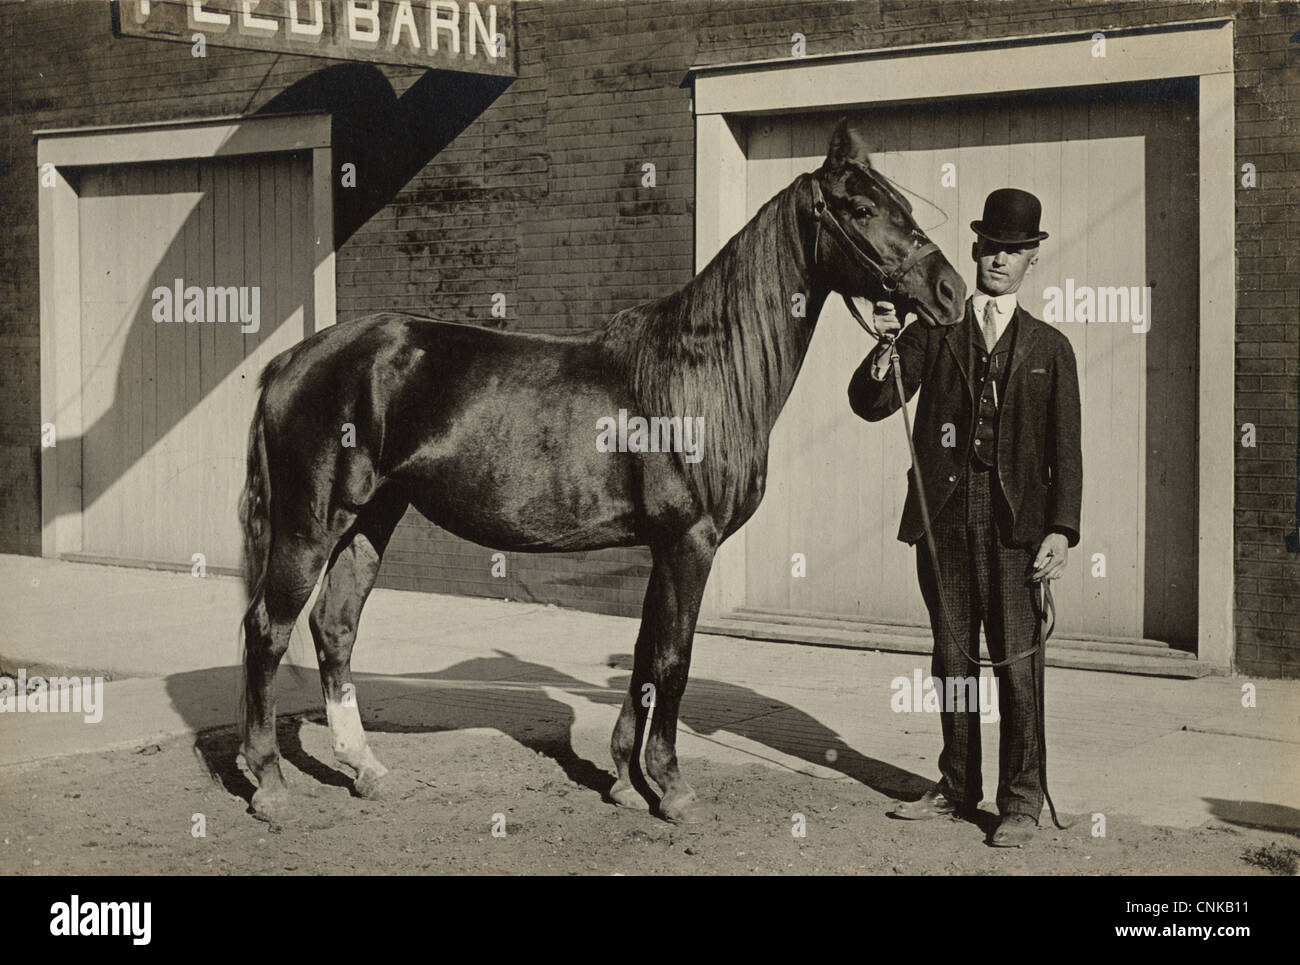 Owner Proudly Displays his Horse at Feed Barn Stock Photo